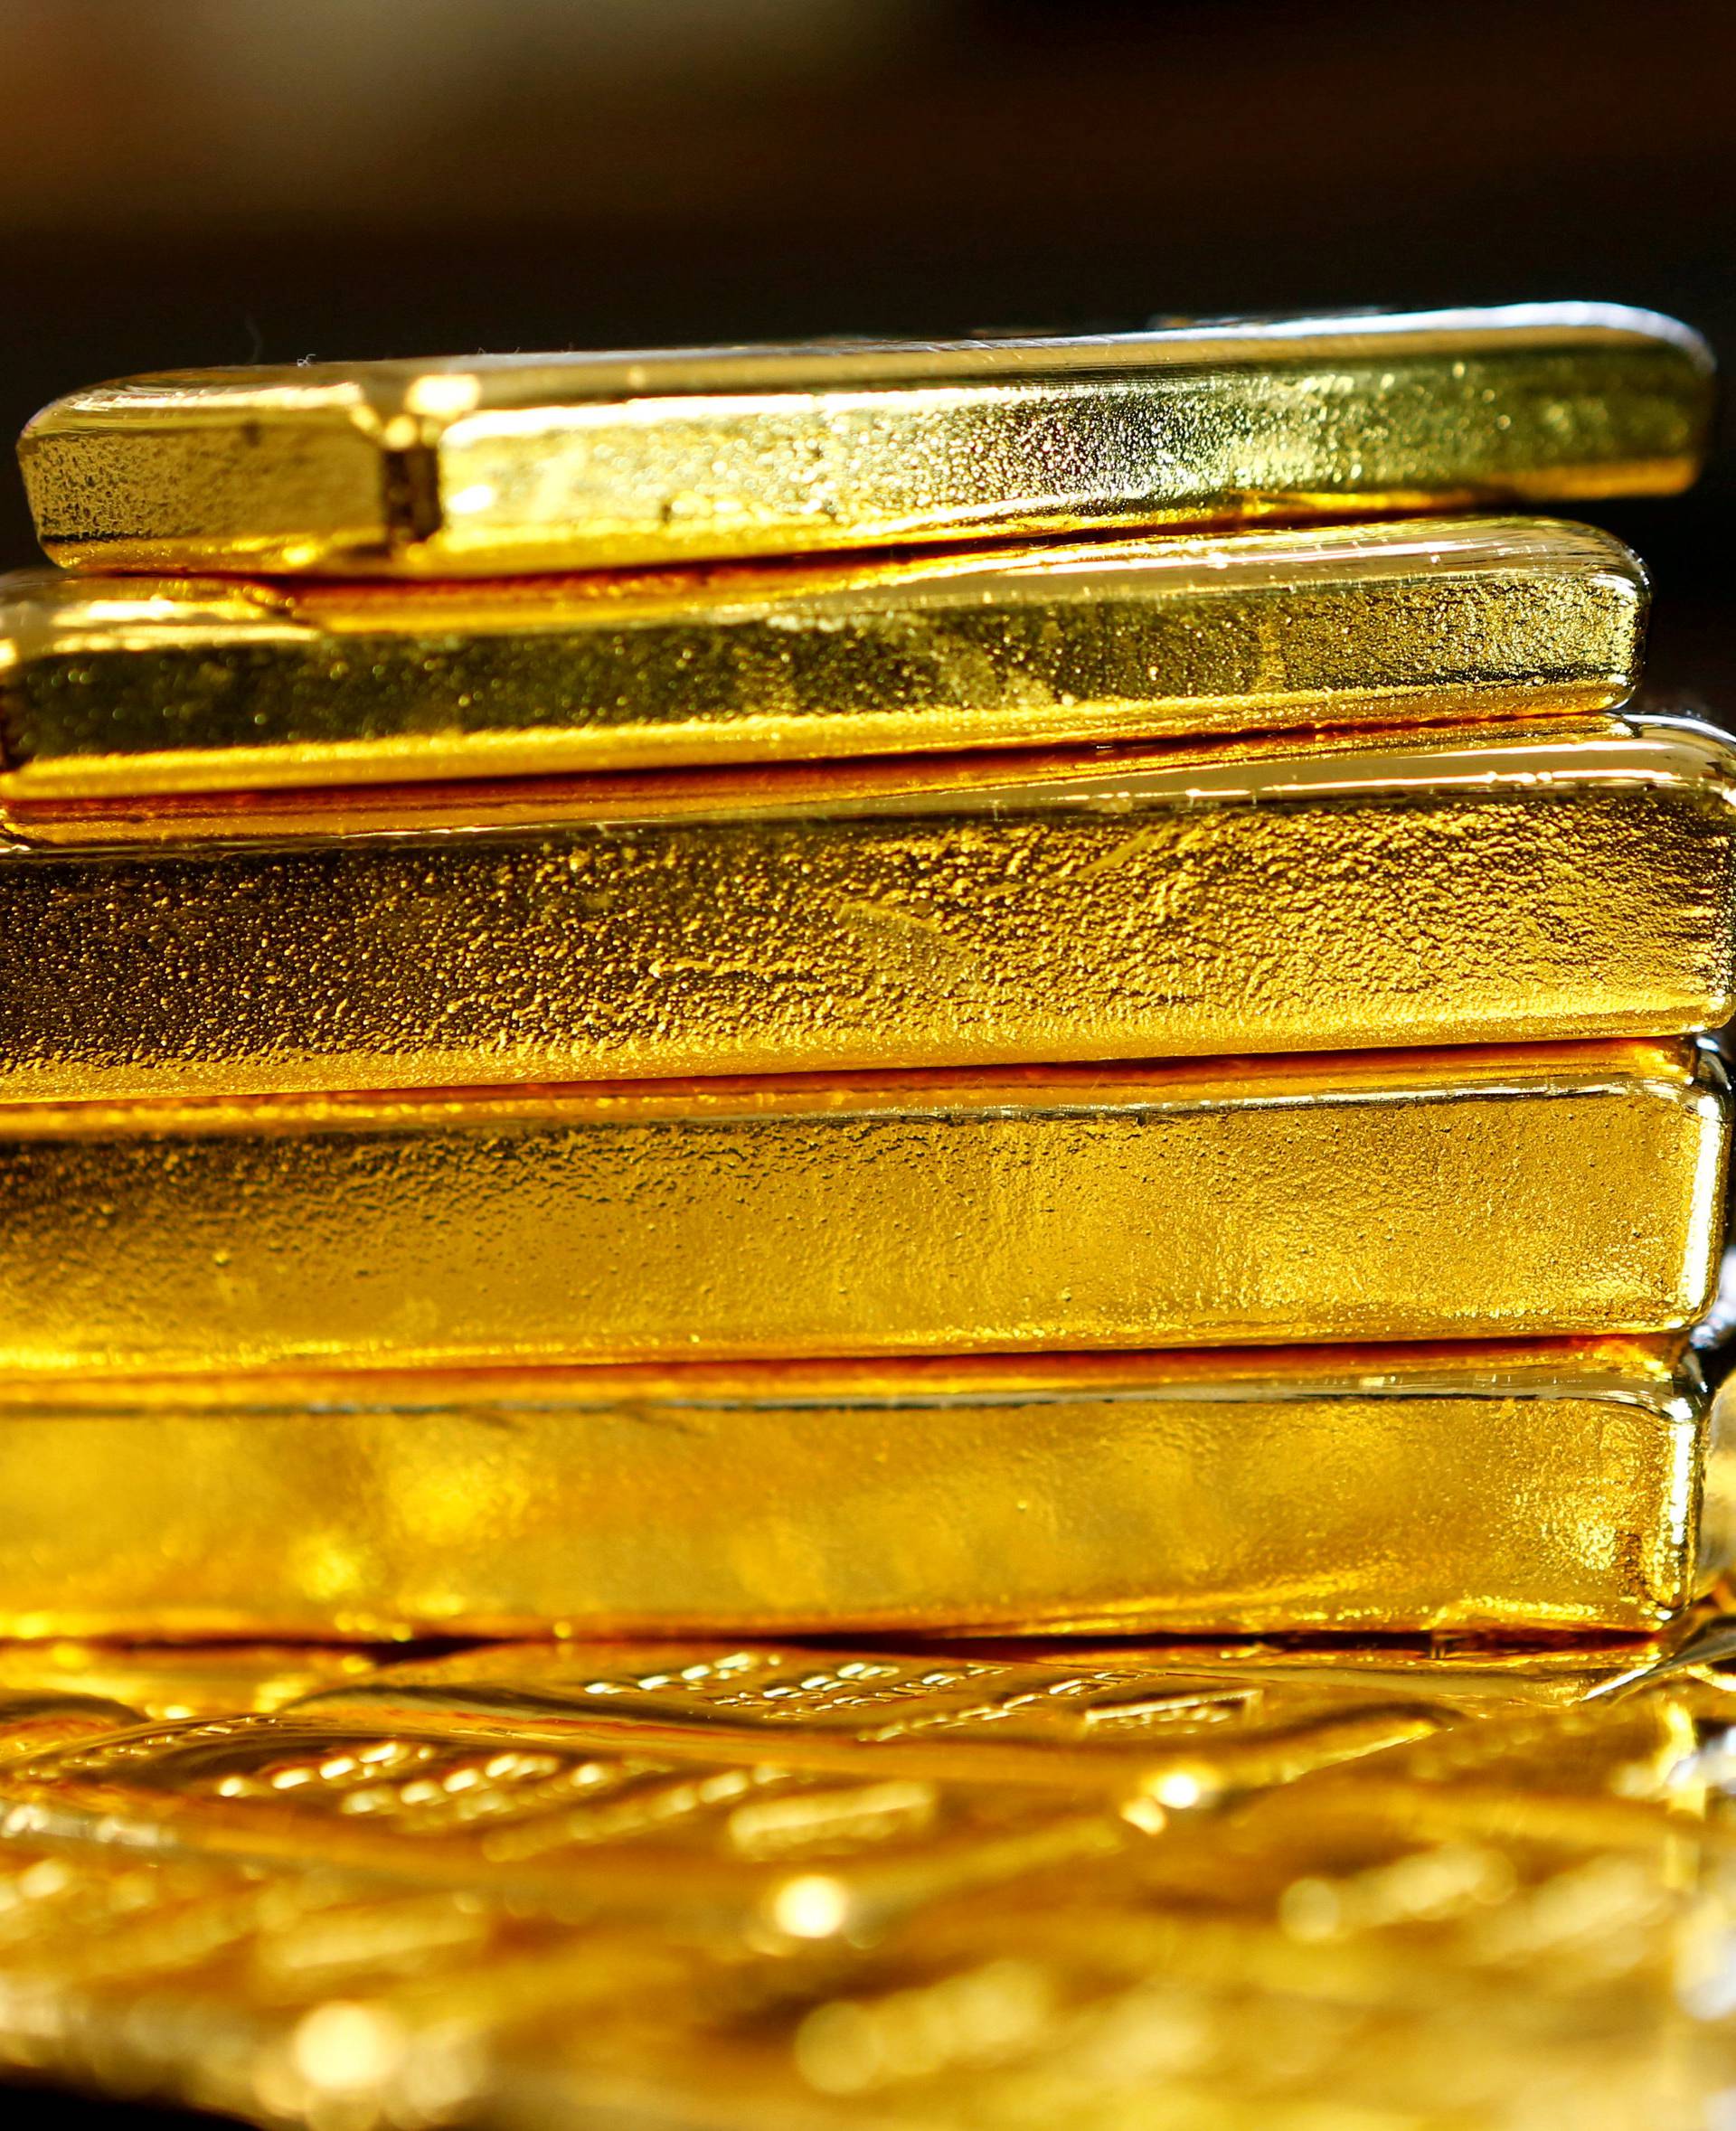 Gold bars are seen at the Austrian Gold and Silver Separating Plant 'Oegussa' in Vienna